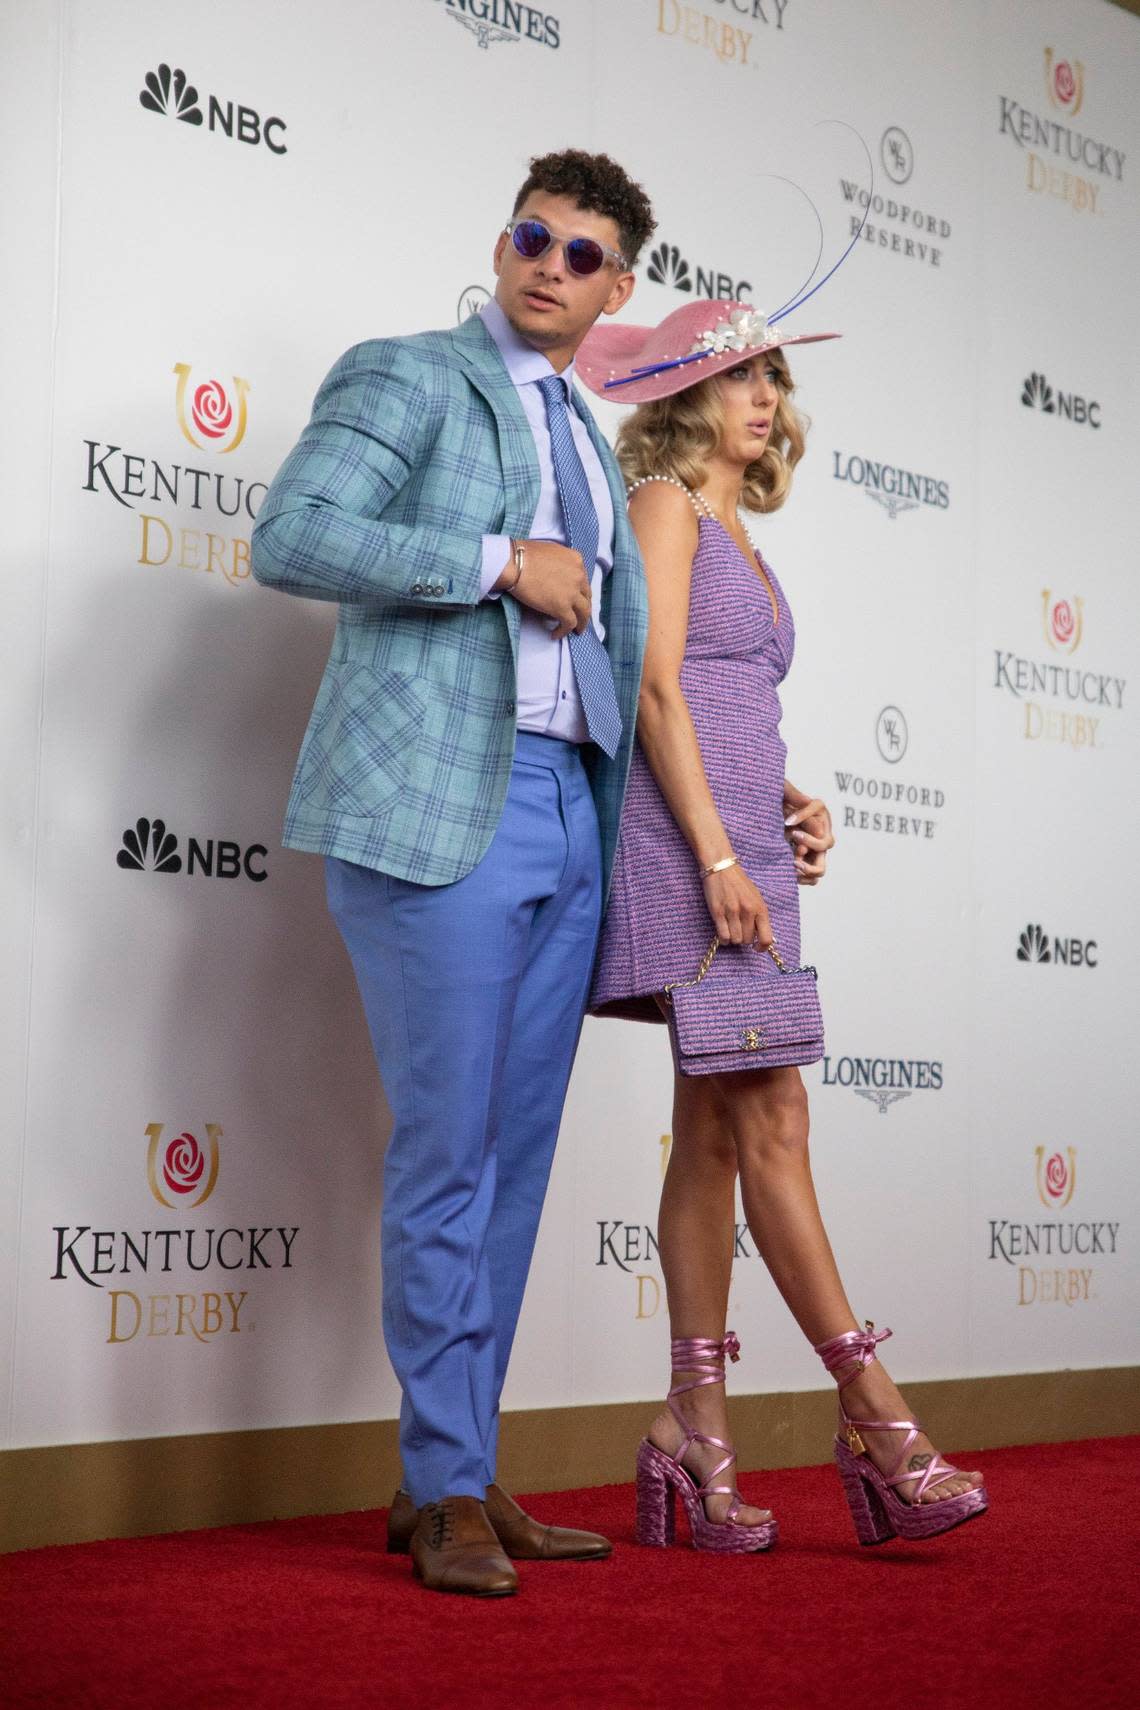 Patrick and Brittany Mahomes walked the red carpet Saturday at Churchill Downs before the 149th Kentucky Derby in Louisville, Kentucky. The Super Bowl MVP was set to give the traditional “riders up” command before the race.